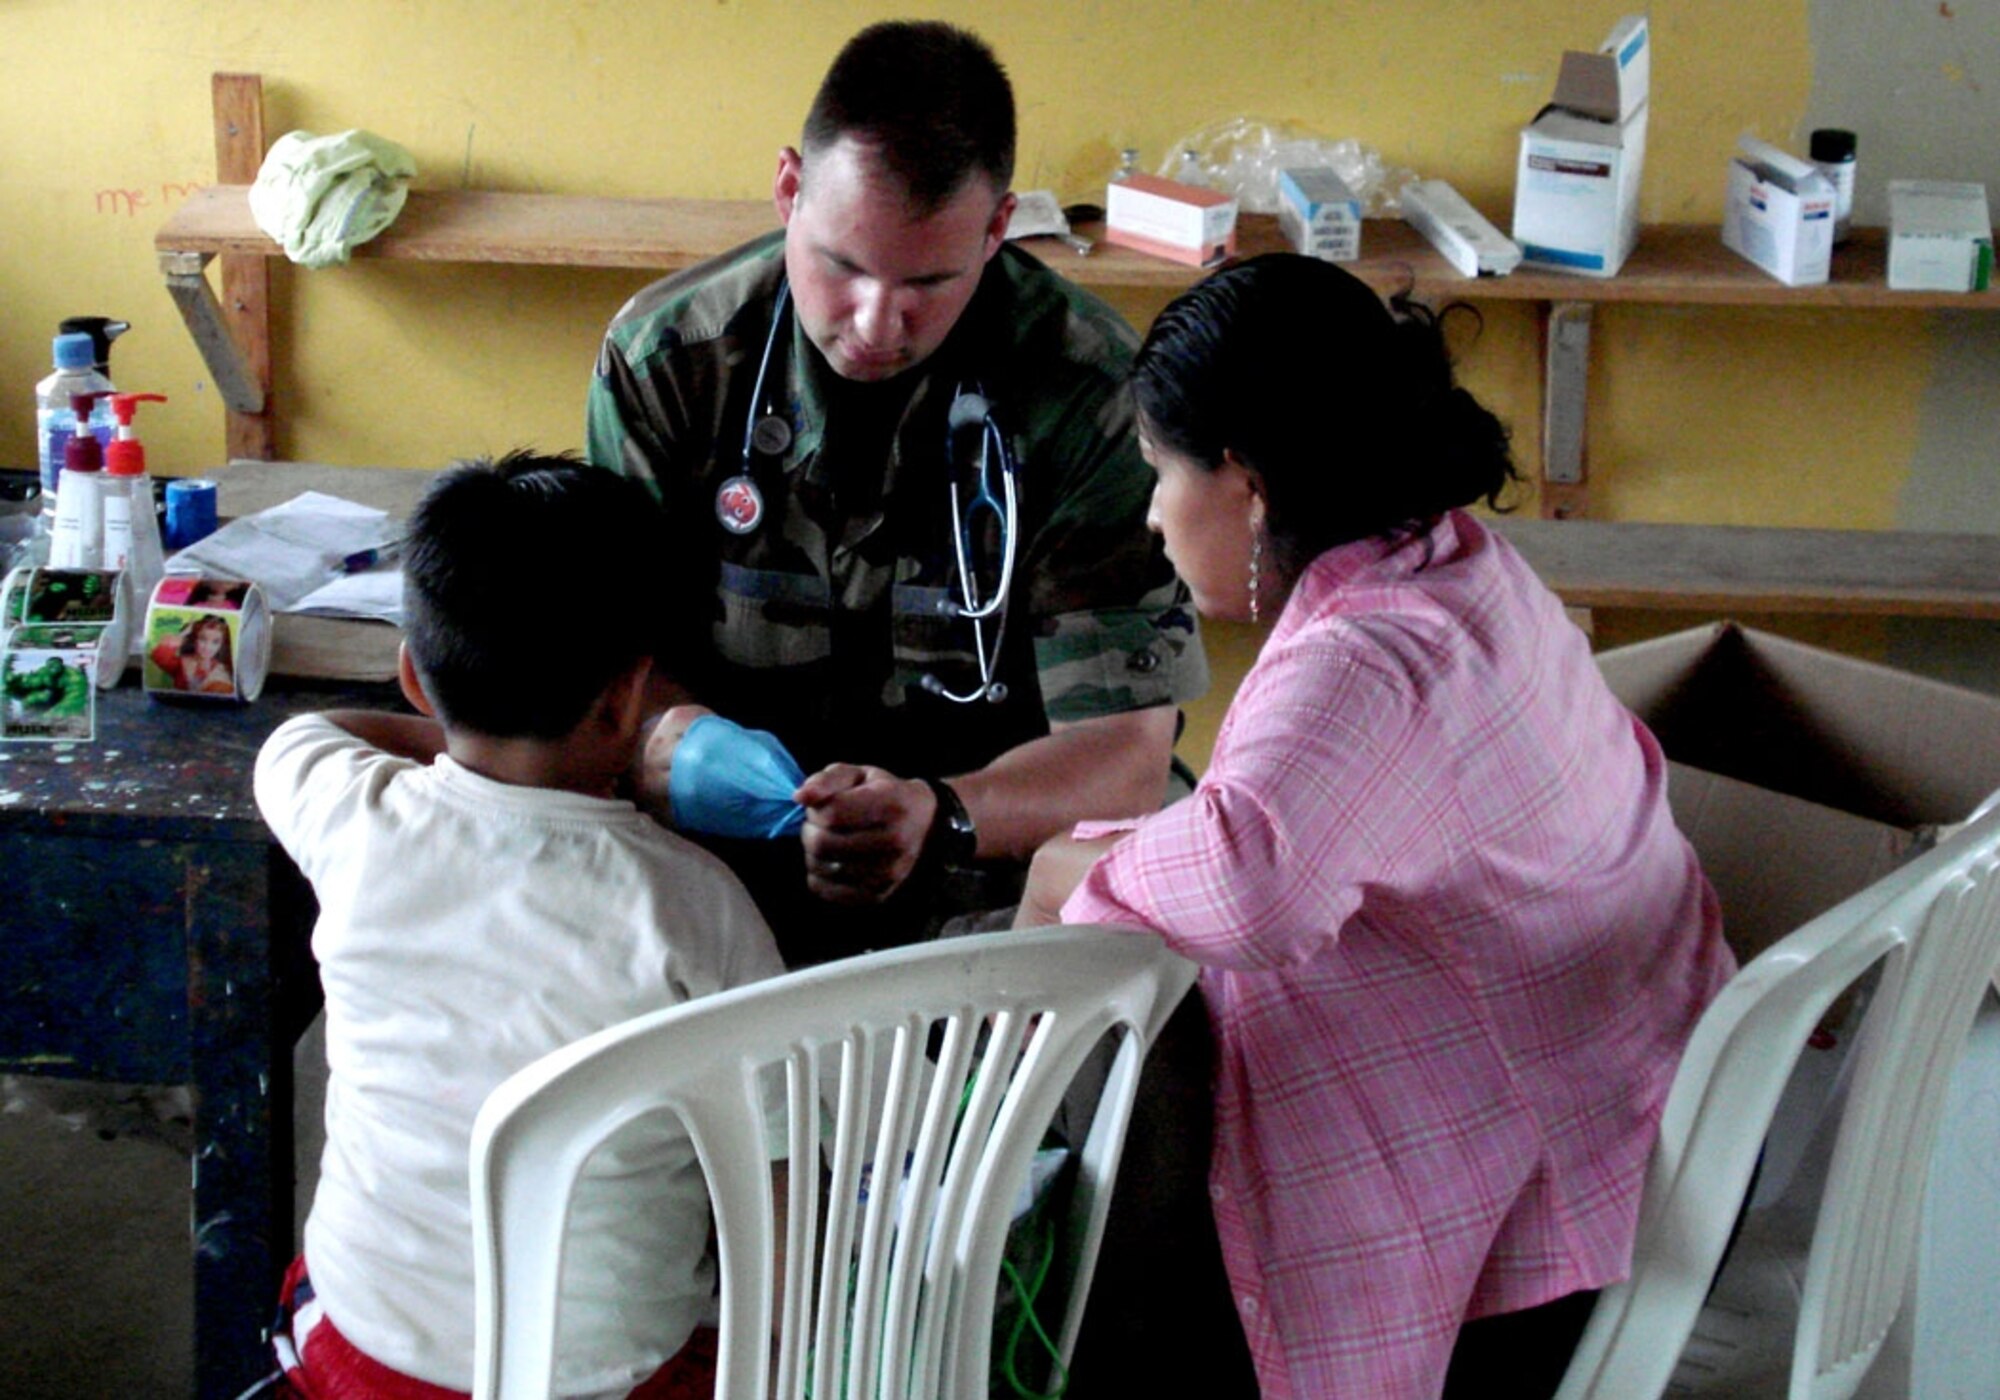 A 49th Medical Group physician finishes up with a patient during the Medical Readiness Training Exercise in Ecuador. Fourteen Airman traveled there for two week on this humanitarian assistance deployment and treated more than 6,800 patients and filled more than 17,500 prescriptions. (U.S. Air Force photo/courtesy of the 49th Medical Group MEDRETE team)